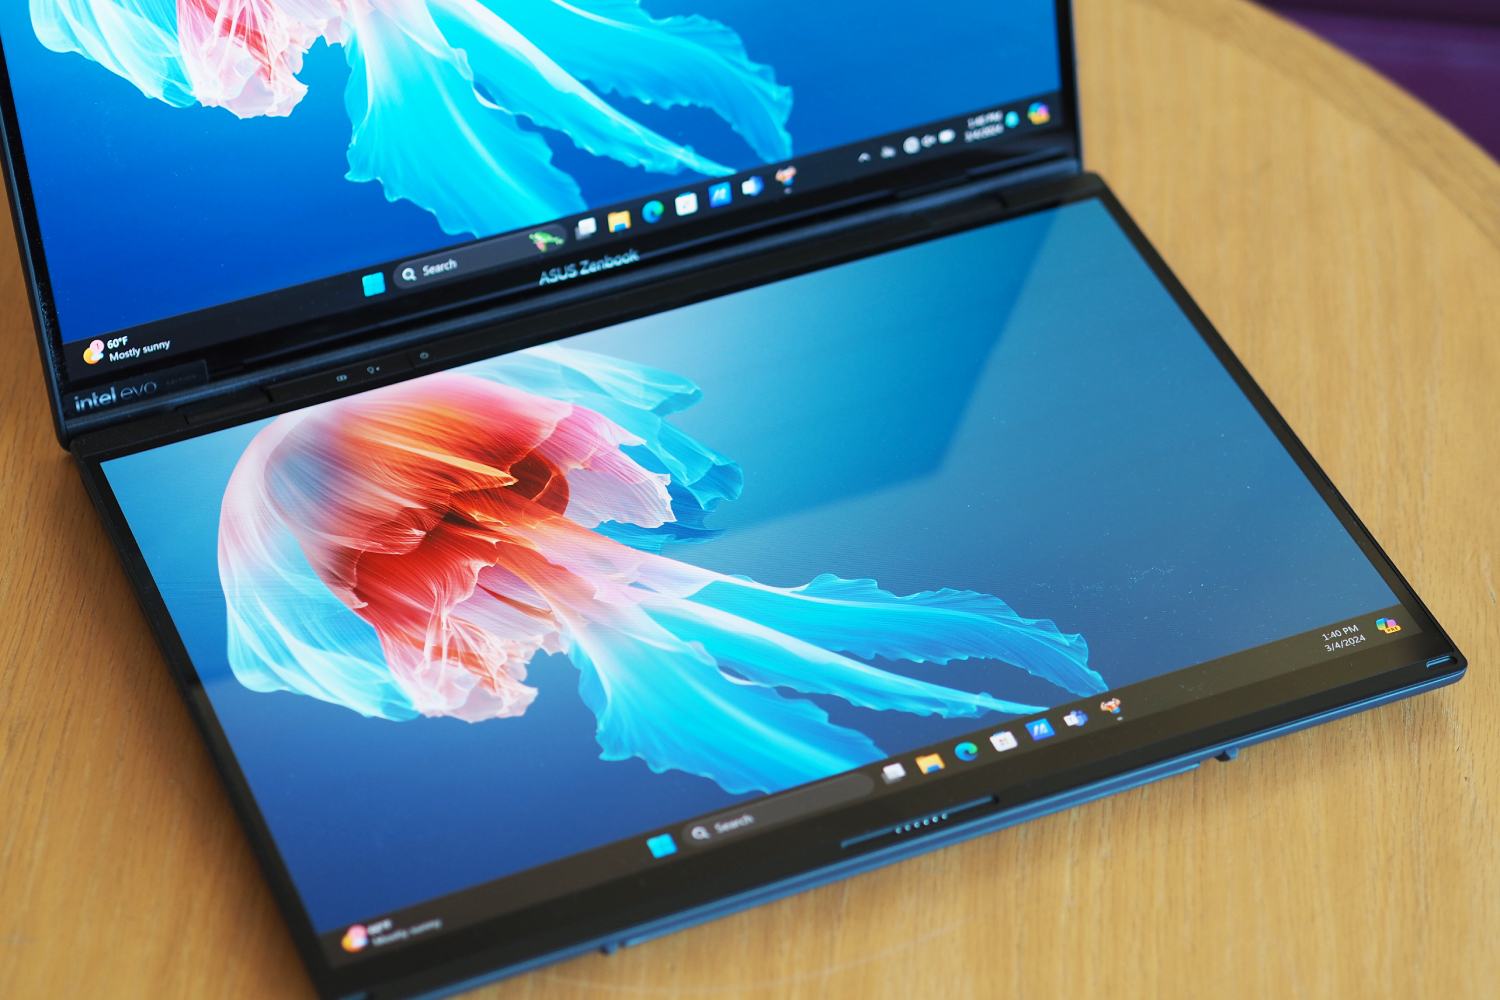 The two screens of the Zenbook Duo